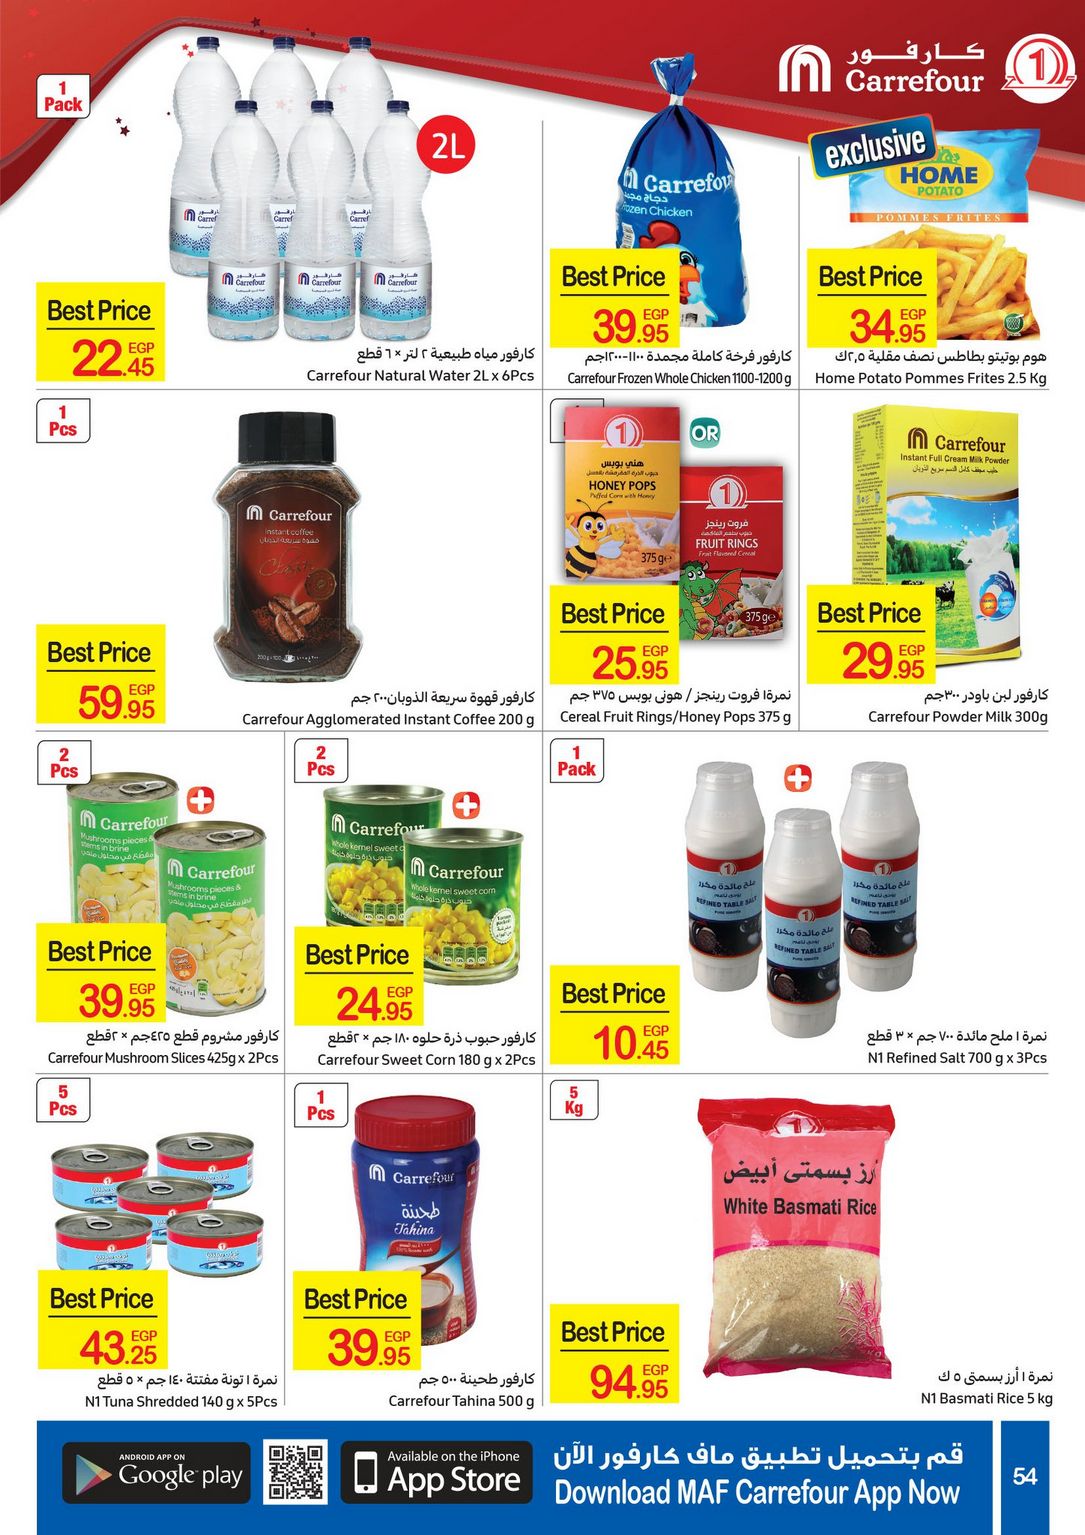 Carrefour Anniversary Offers till 18/2/2021 | Carrefour Egypt 56